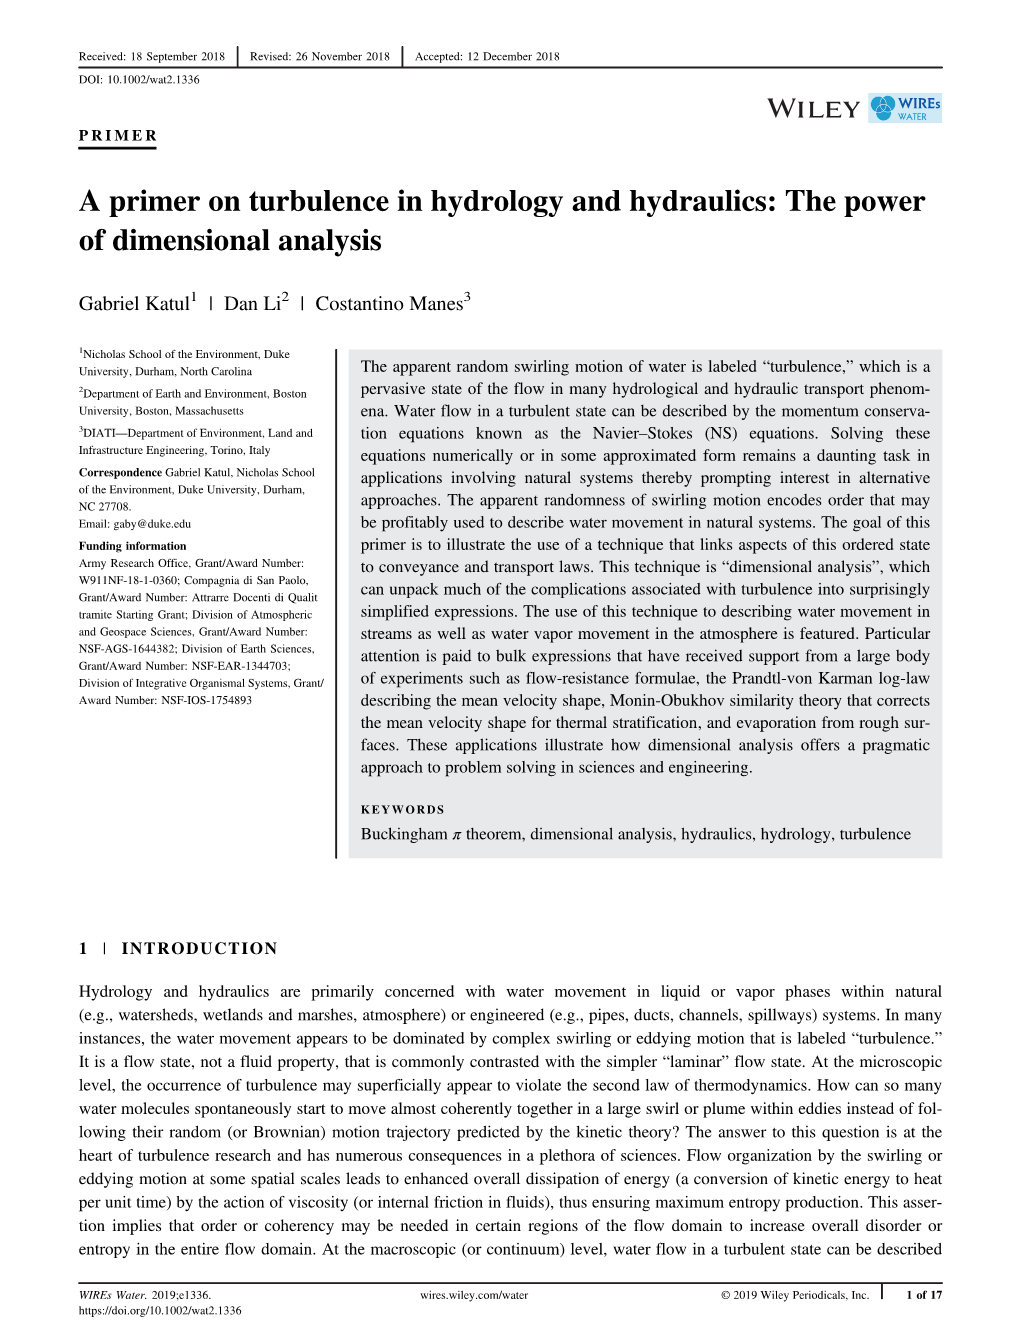 A Primer on Turbulence in Hydrology and Hydraulics: the Power of Dimensional Analysis